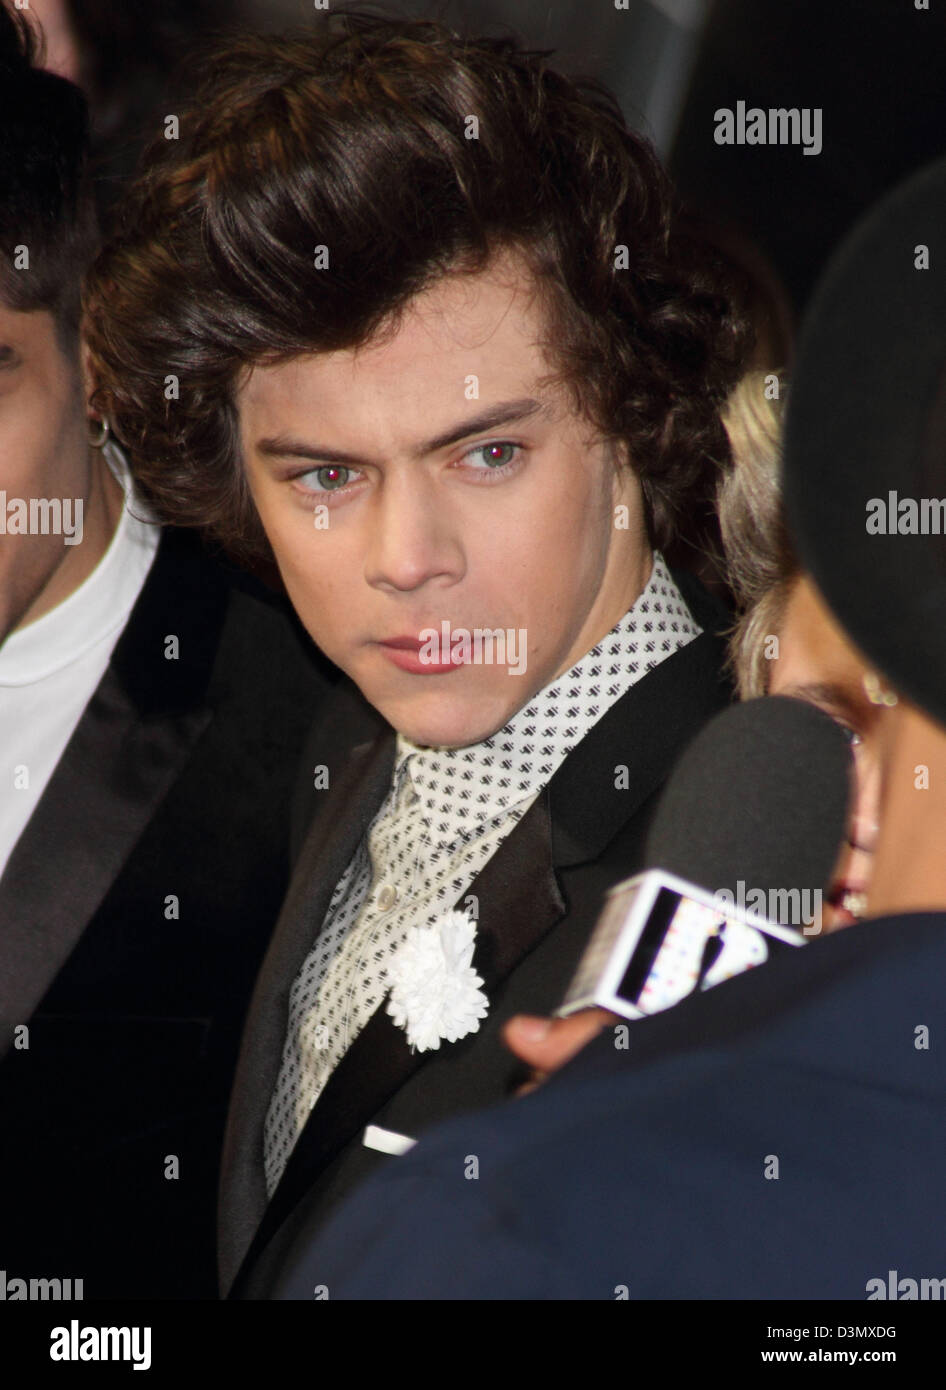 London, UK. 20th February 2013. Harry Styles at the The 2013 Brit Awards at the O2 Arena, London - February 20th 2013  Photo by Keith Mayhew/ Alamy Live News Stock Photo